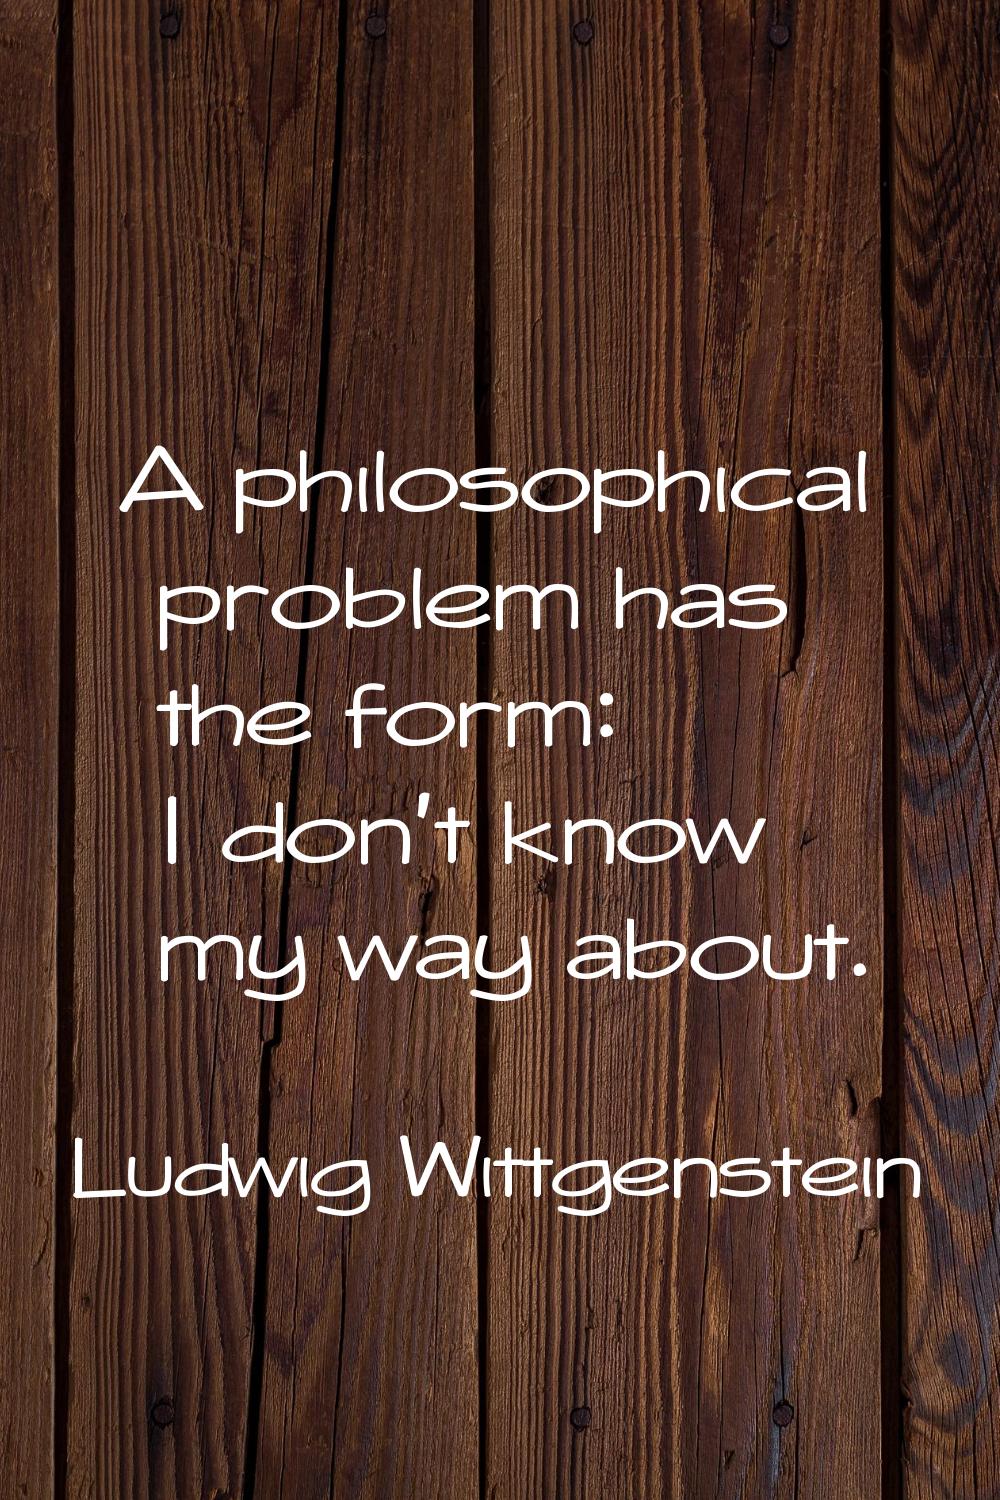 A philosophical problem has the form: I don't know my way about.